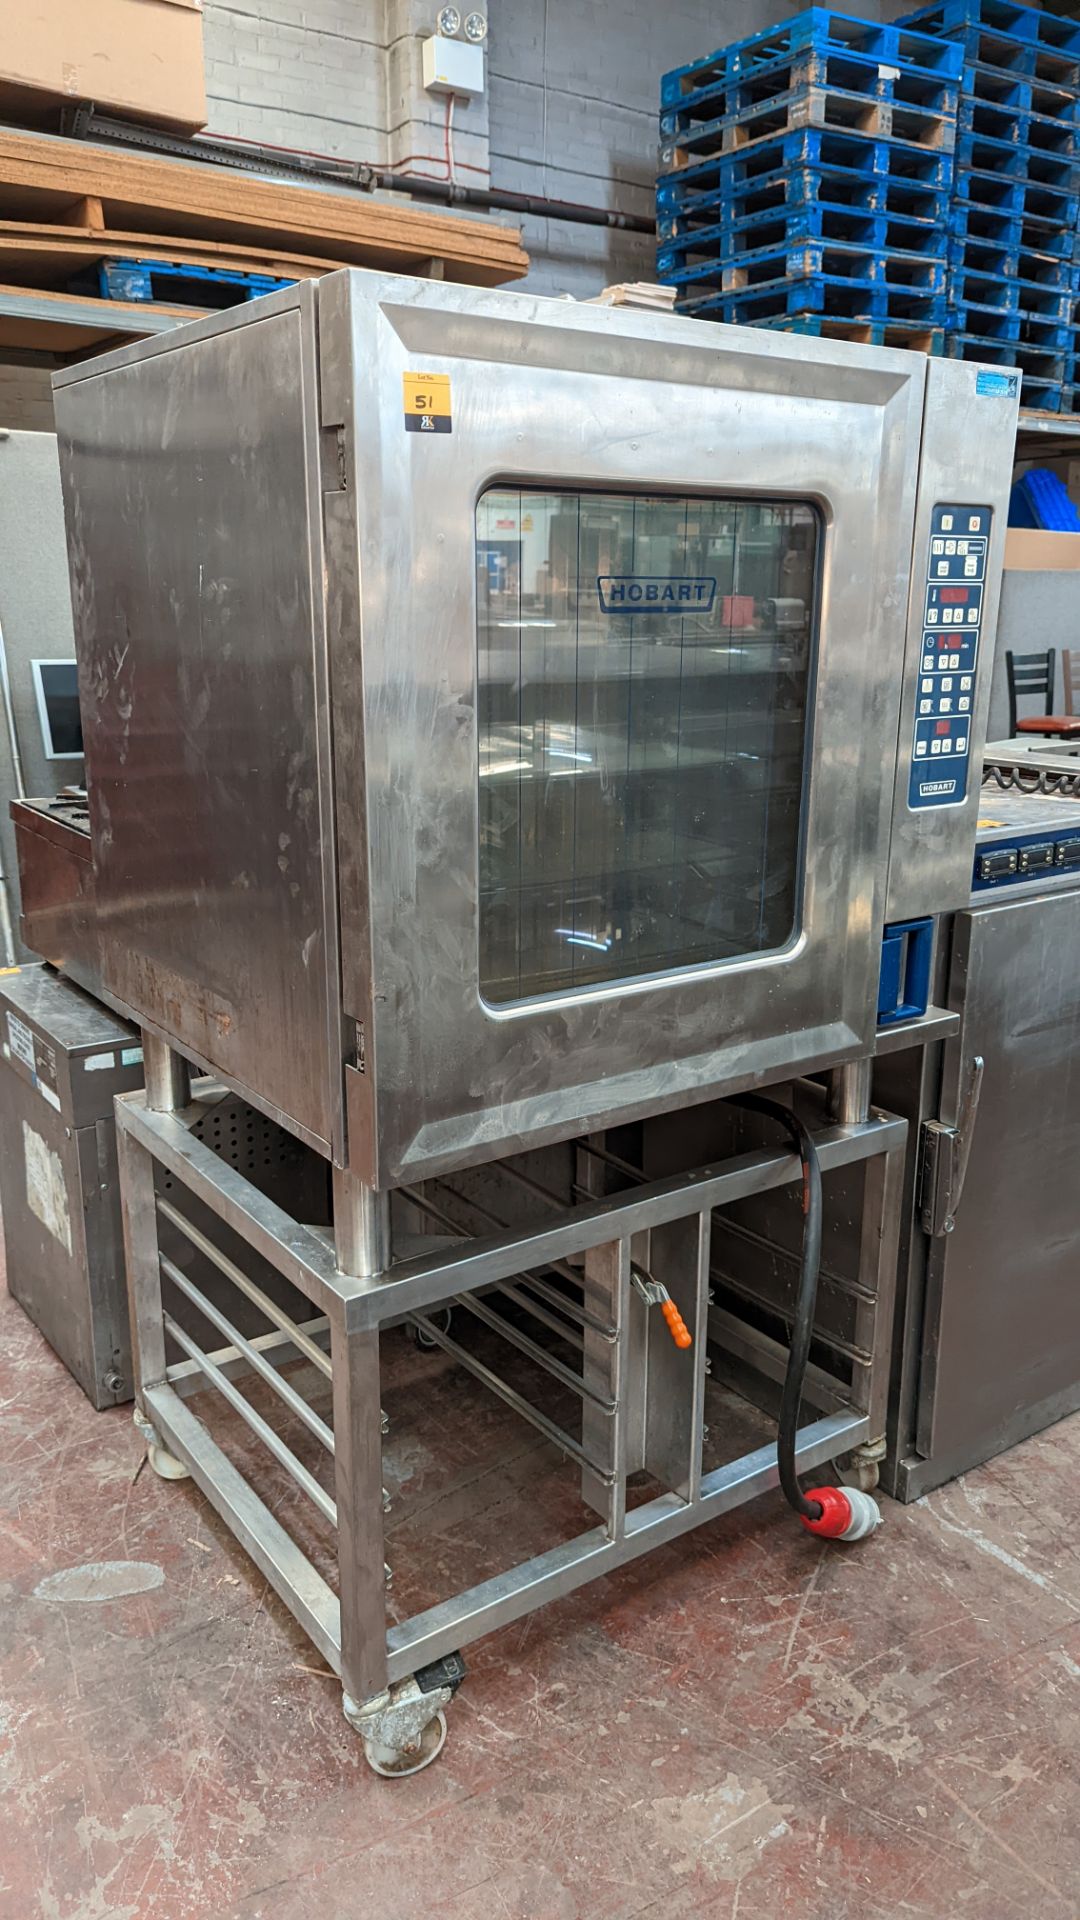 Hobart stainless steel large commercial oven on mobile stand - Image 2 of 8